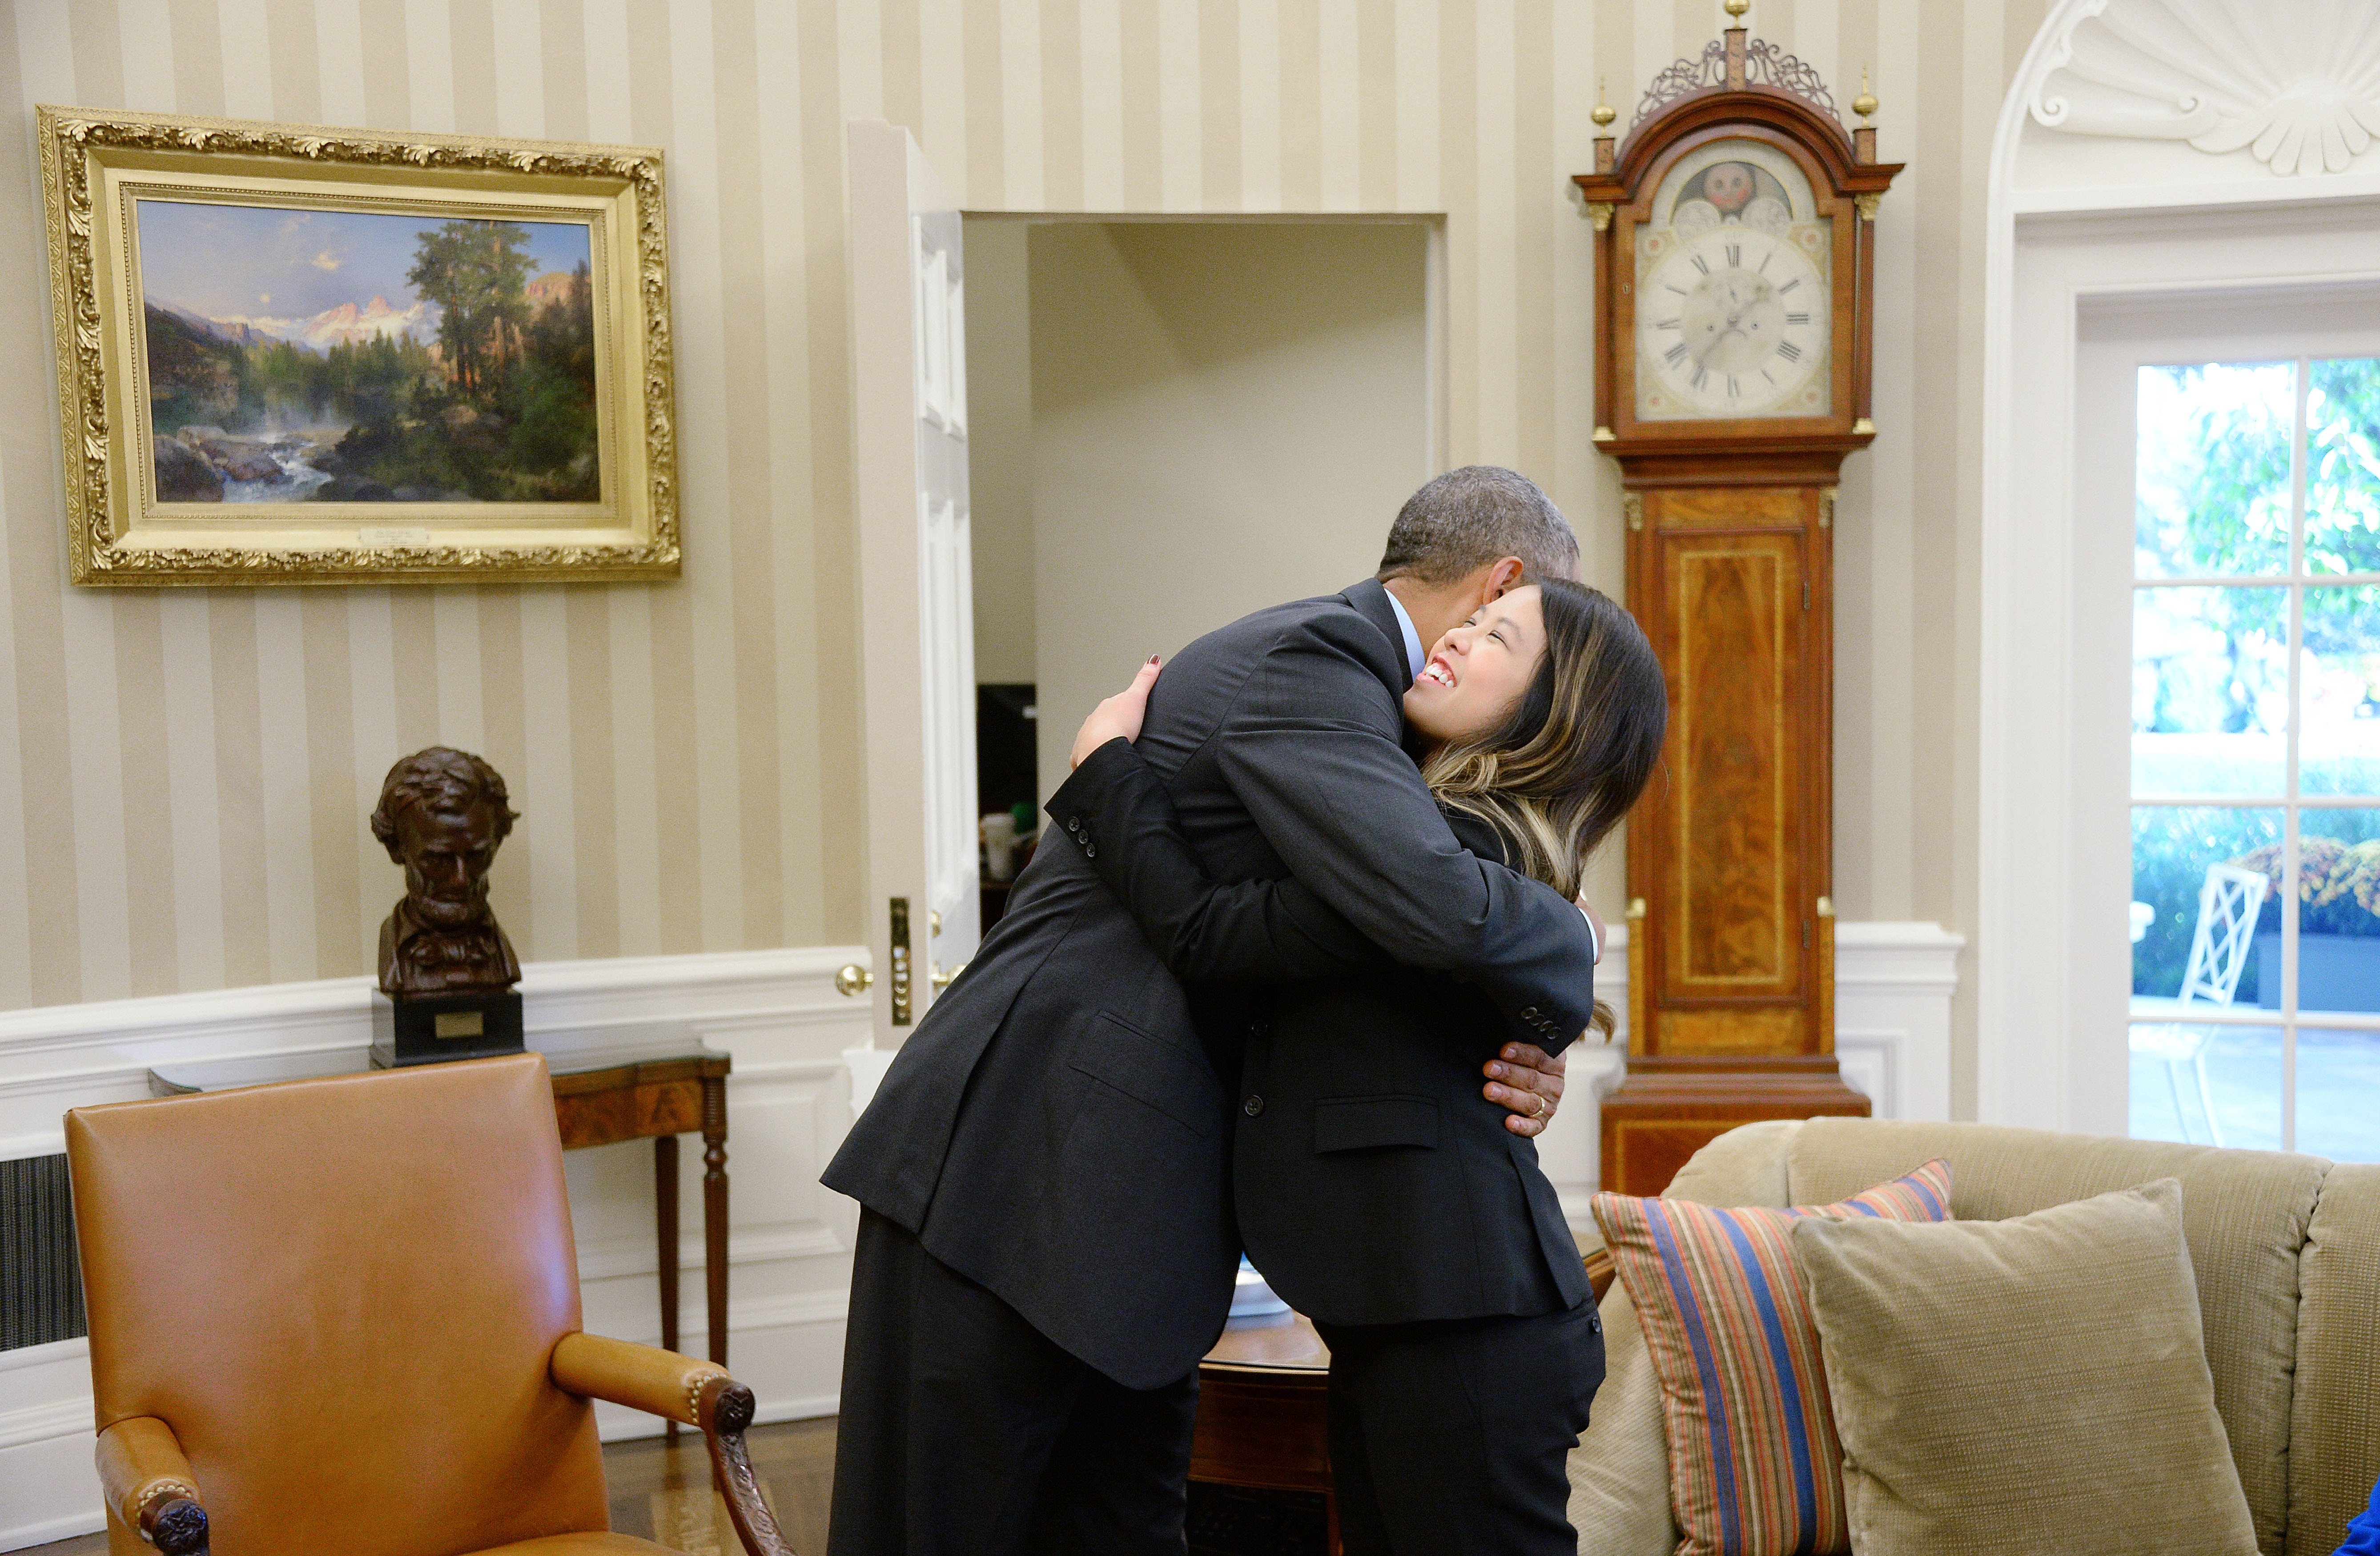 Oct. 24, 2014. U.S. President Barack Obama gives a hug to Dallas nurse Nina Pham in the Oval Office of the White House October 24, 2014 in Washington, DC. Pham, a nurse who was infected with Ebola from treating patient Thomas Eric Duncan at Texas Health Presbyterian Hospital in Dallas and was first diagnosed on October 12, was declared free of the virus.